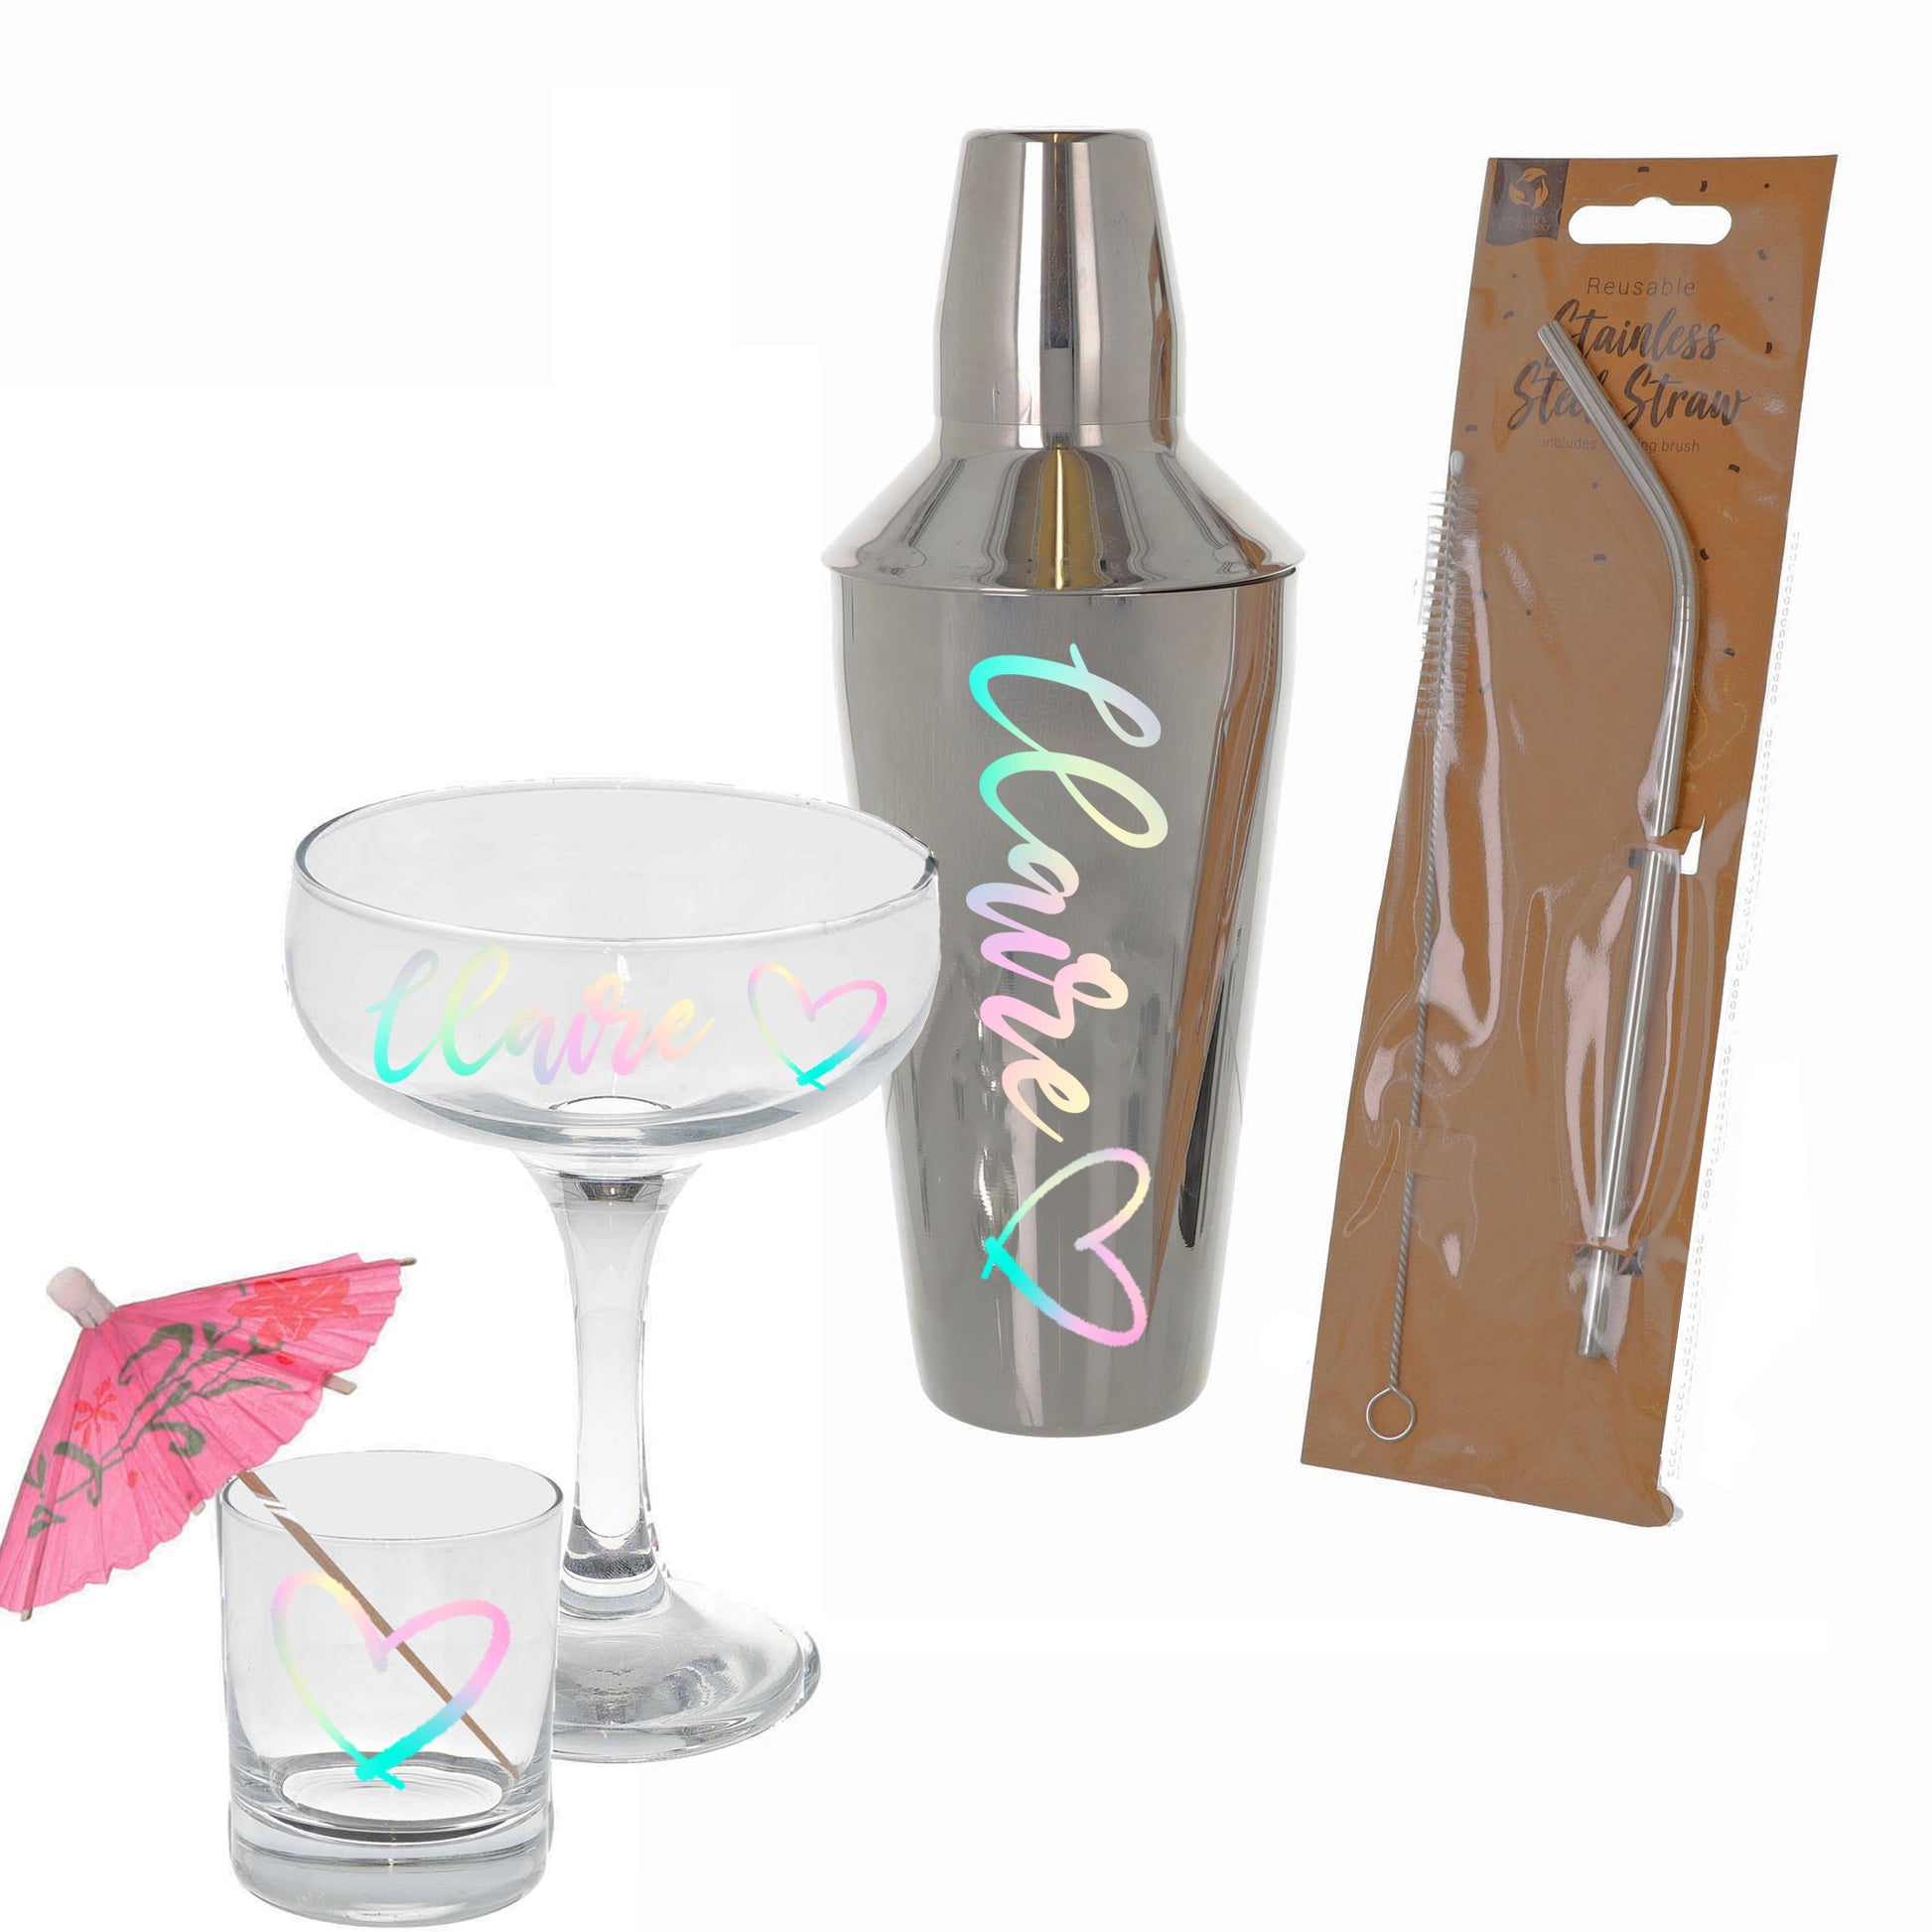 Personalised Pornstar Martini Cocktail Shaker Set With Glass & Shot Glass Gift Set  - Always Looking Good - Full Set  